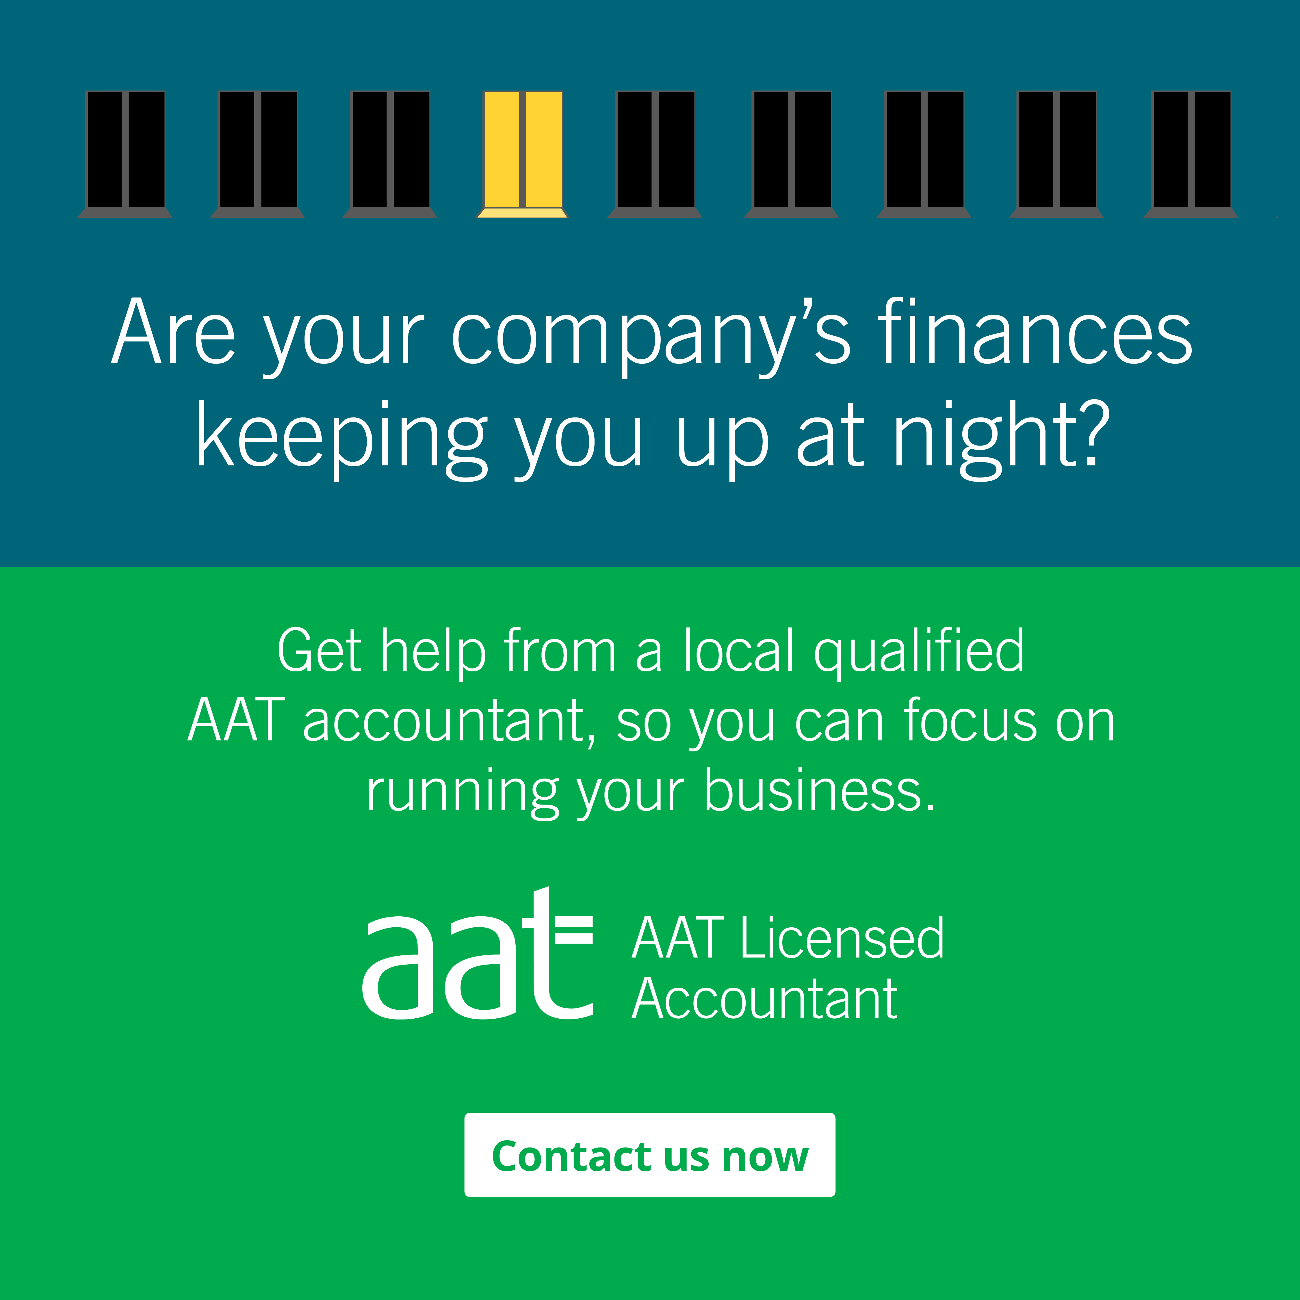 accountants in Newcastle-under-Lyme and Staffordshire